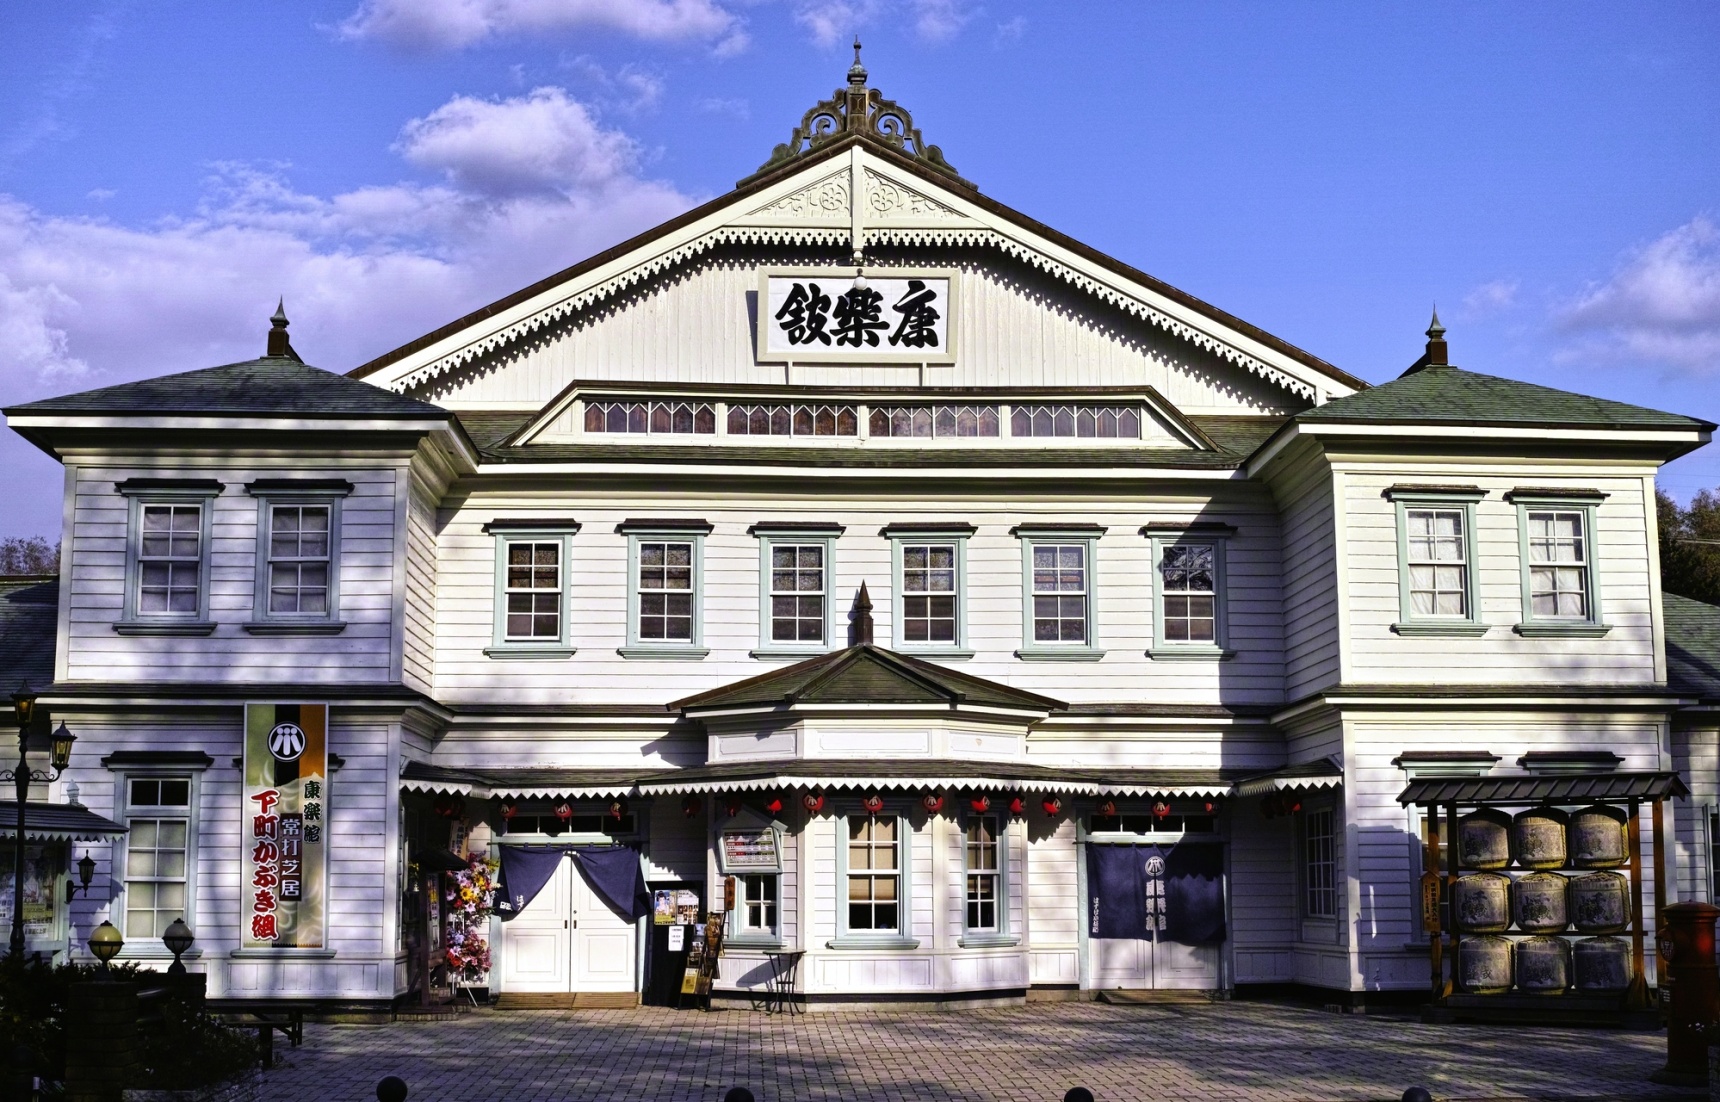 The Oldest Extant Wooden Theater in Japan